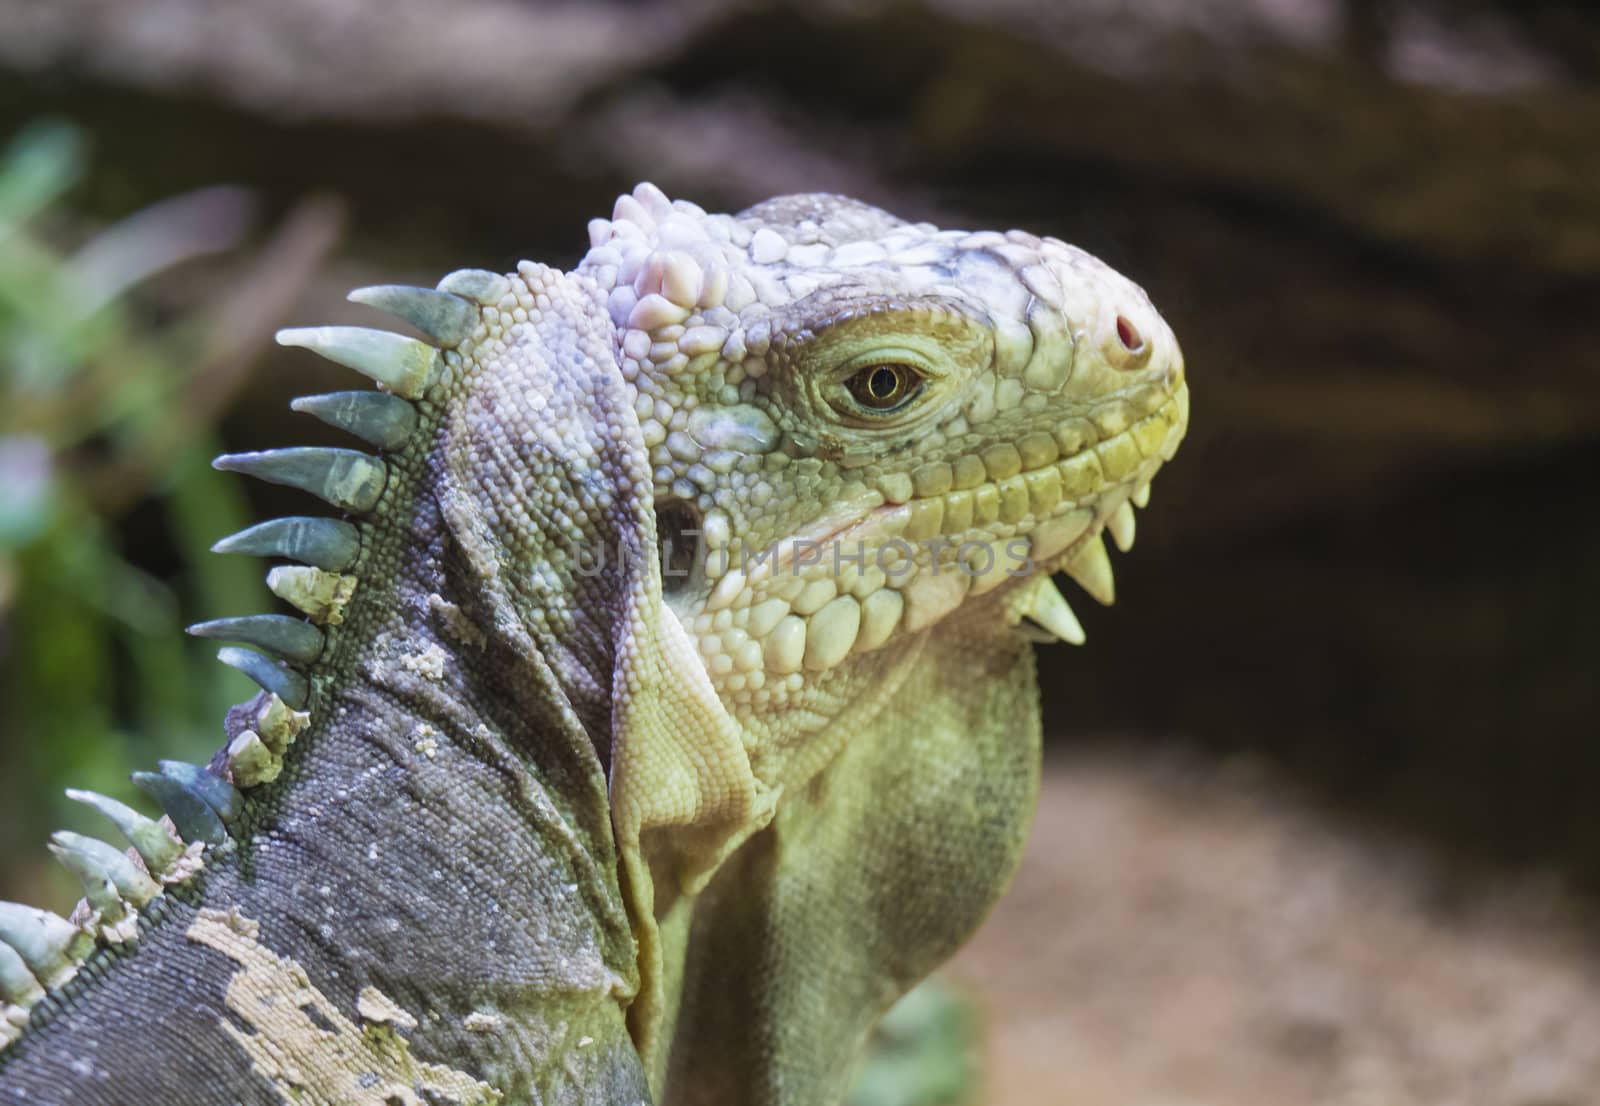 Close up portrait of a lesser Antillean iguana. Igauana delicatissima is a large arboreal lizard endemic to the Lesser Antilles, critically endangered large arboreal lizard. Selective focus on eye. by Henkeova